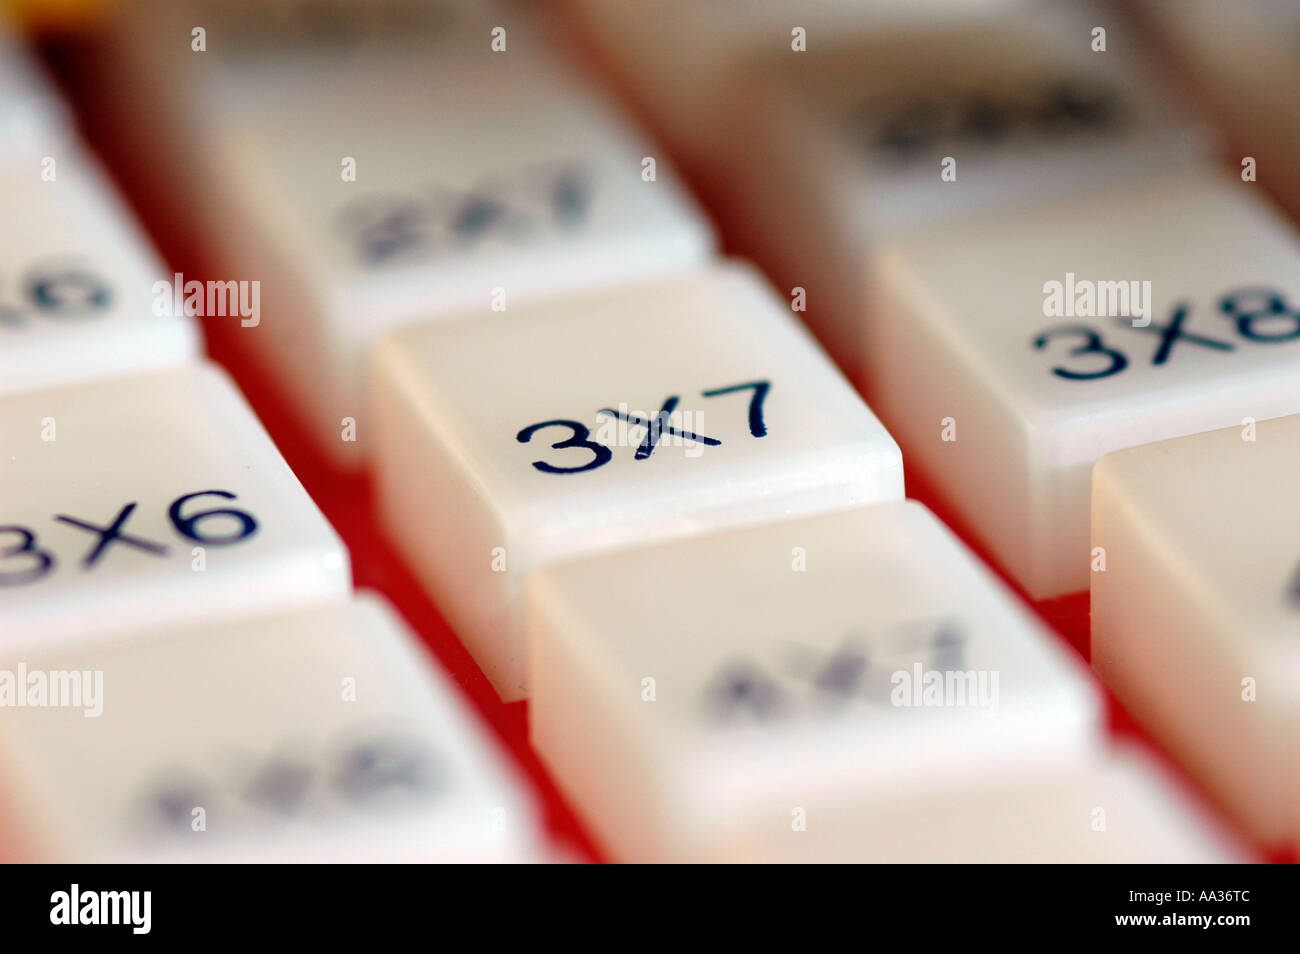 Times Learning Numbers 3 7 21 Stock Photo